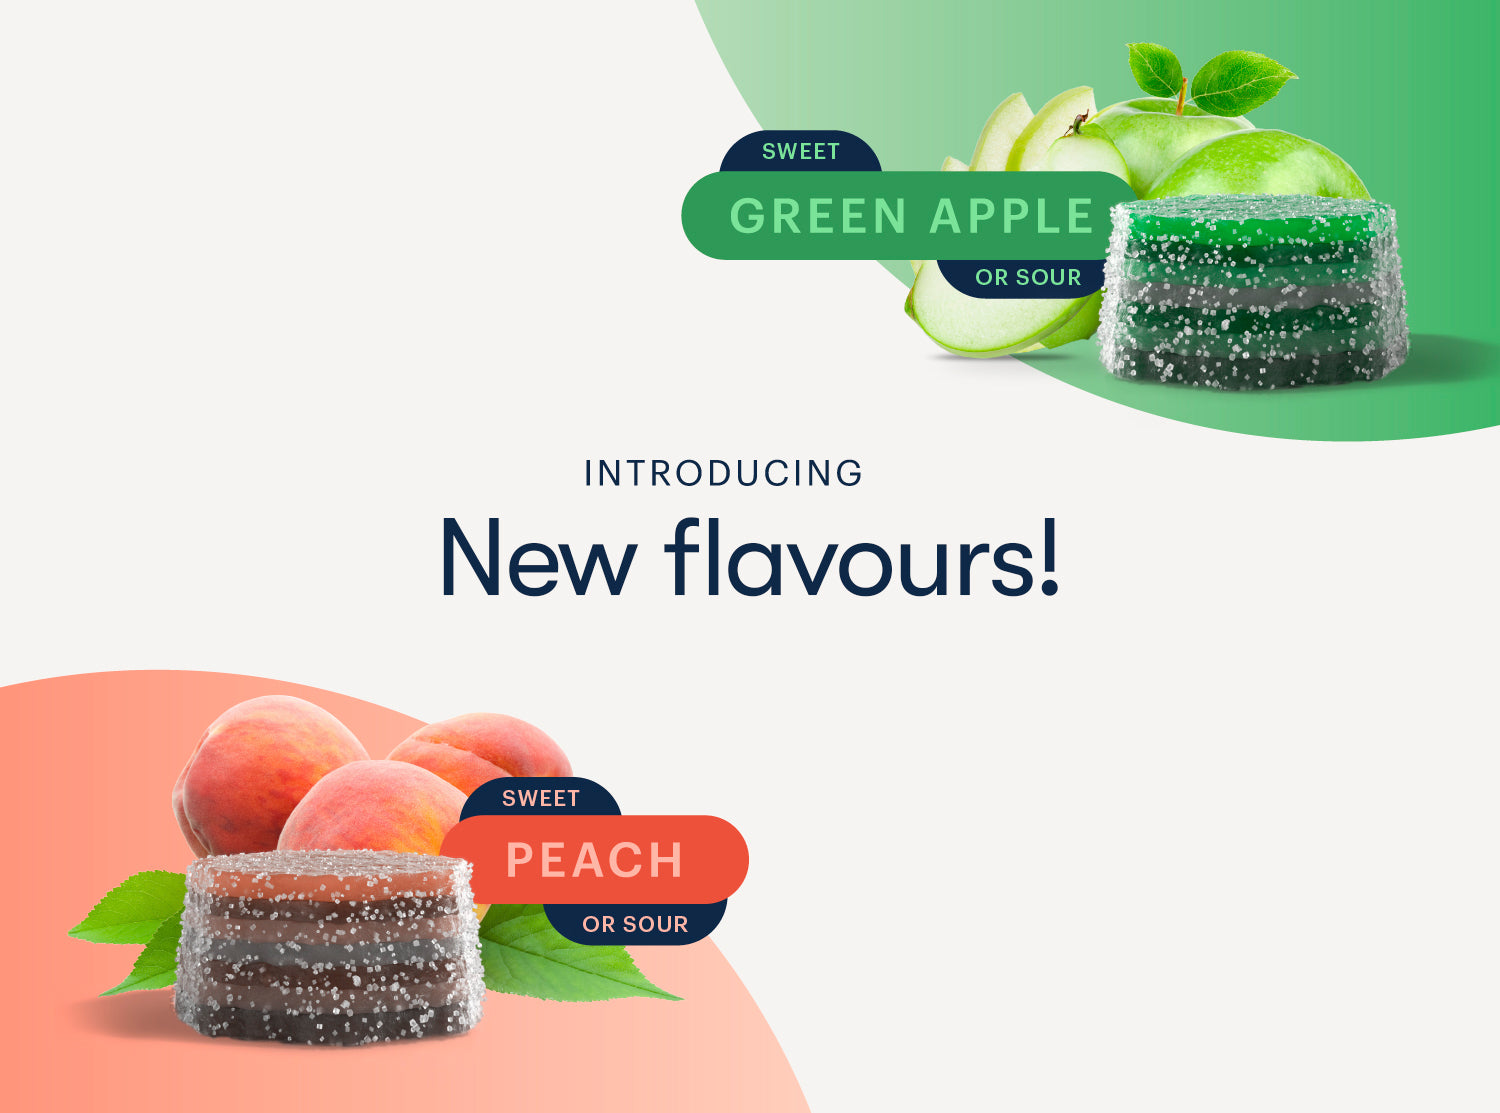 Introducing our brand new flavours, green apple and succulent peach